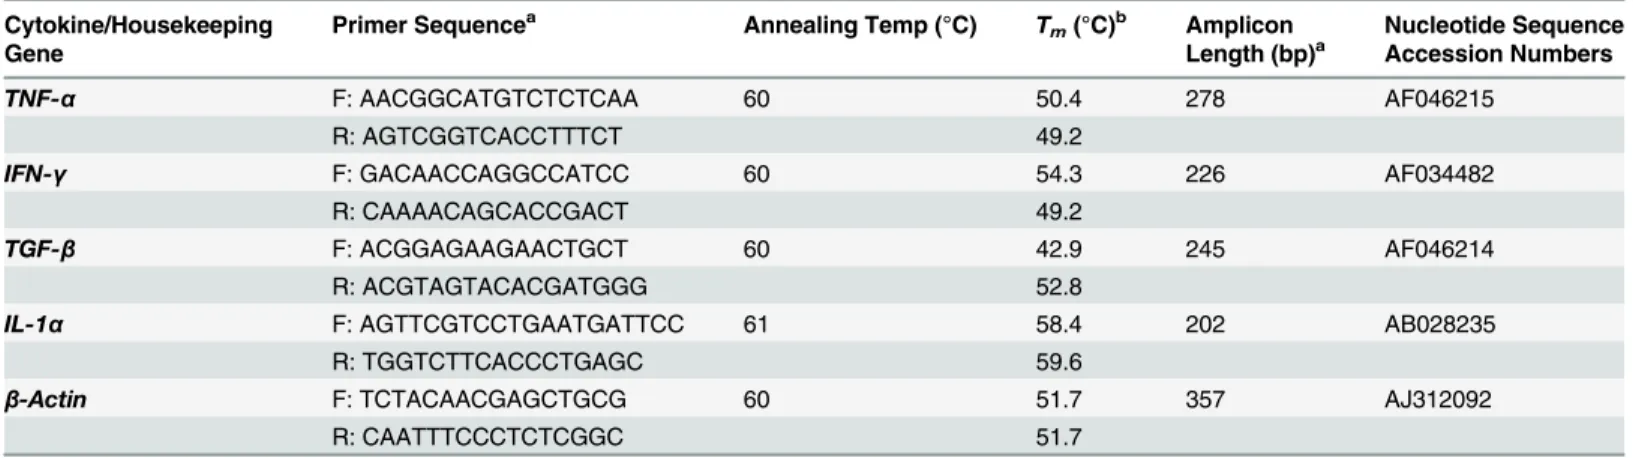 Table 1. Detailed primers and conditions used for qRT-PCR assays.